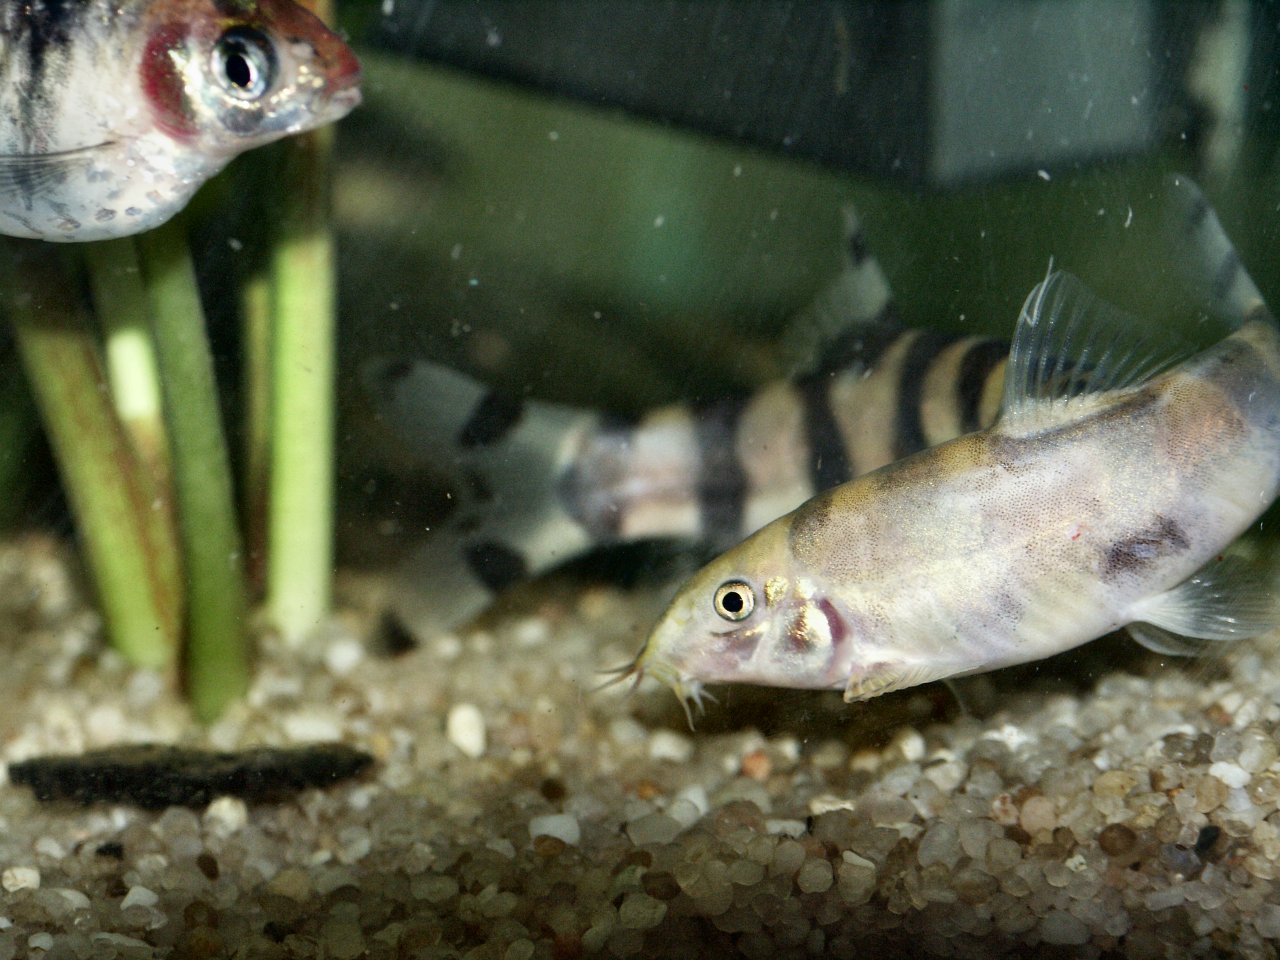 Botia histronica - Two fighting. Front fish is "grayed out"